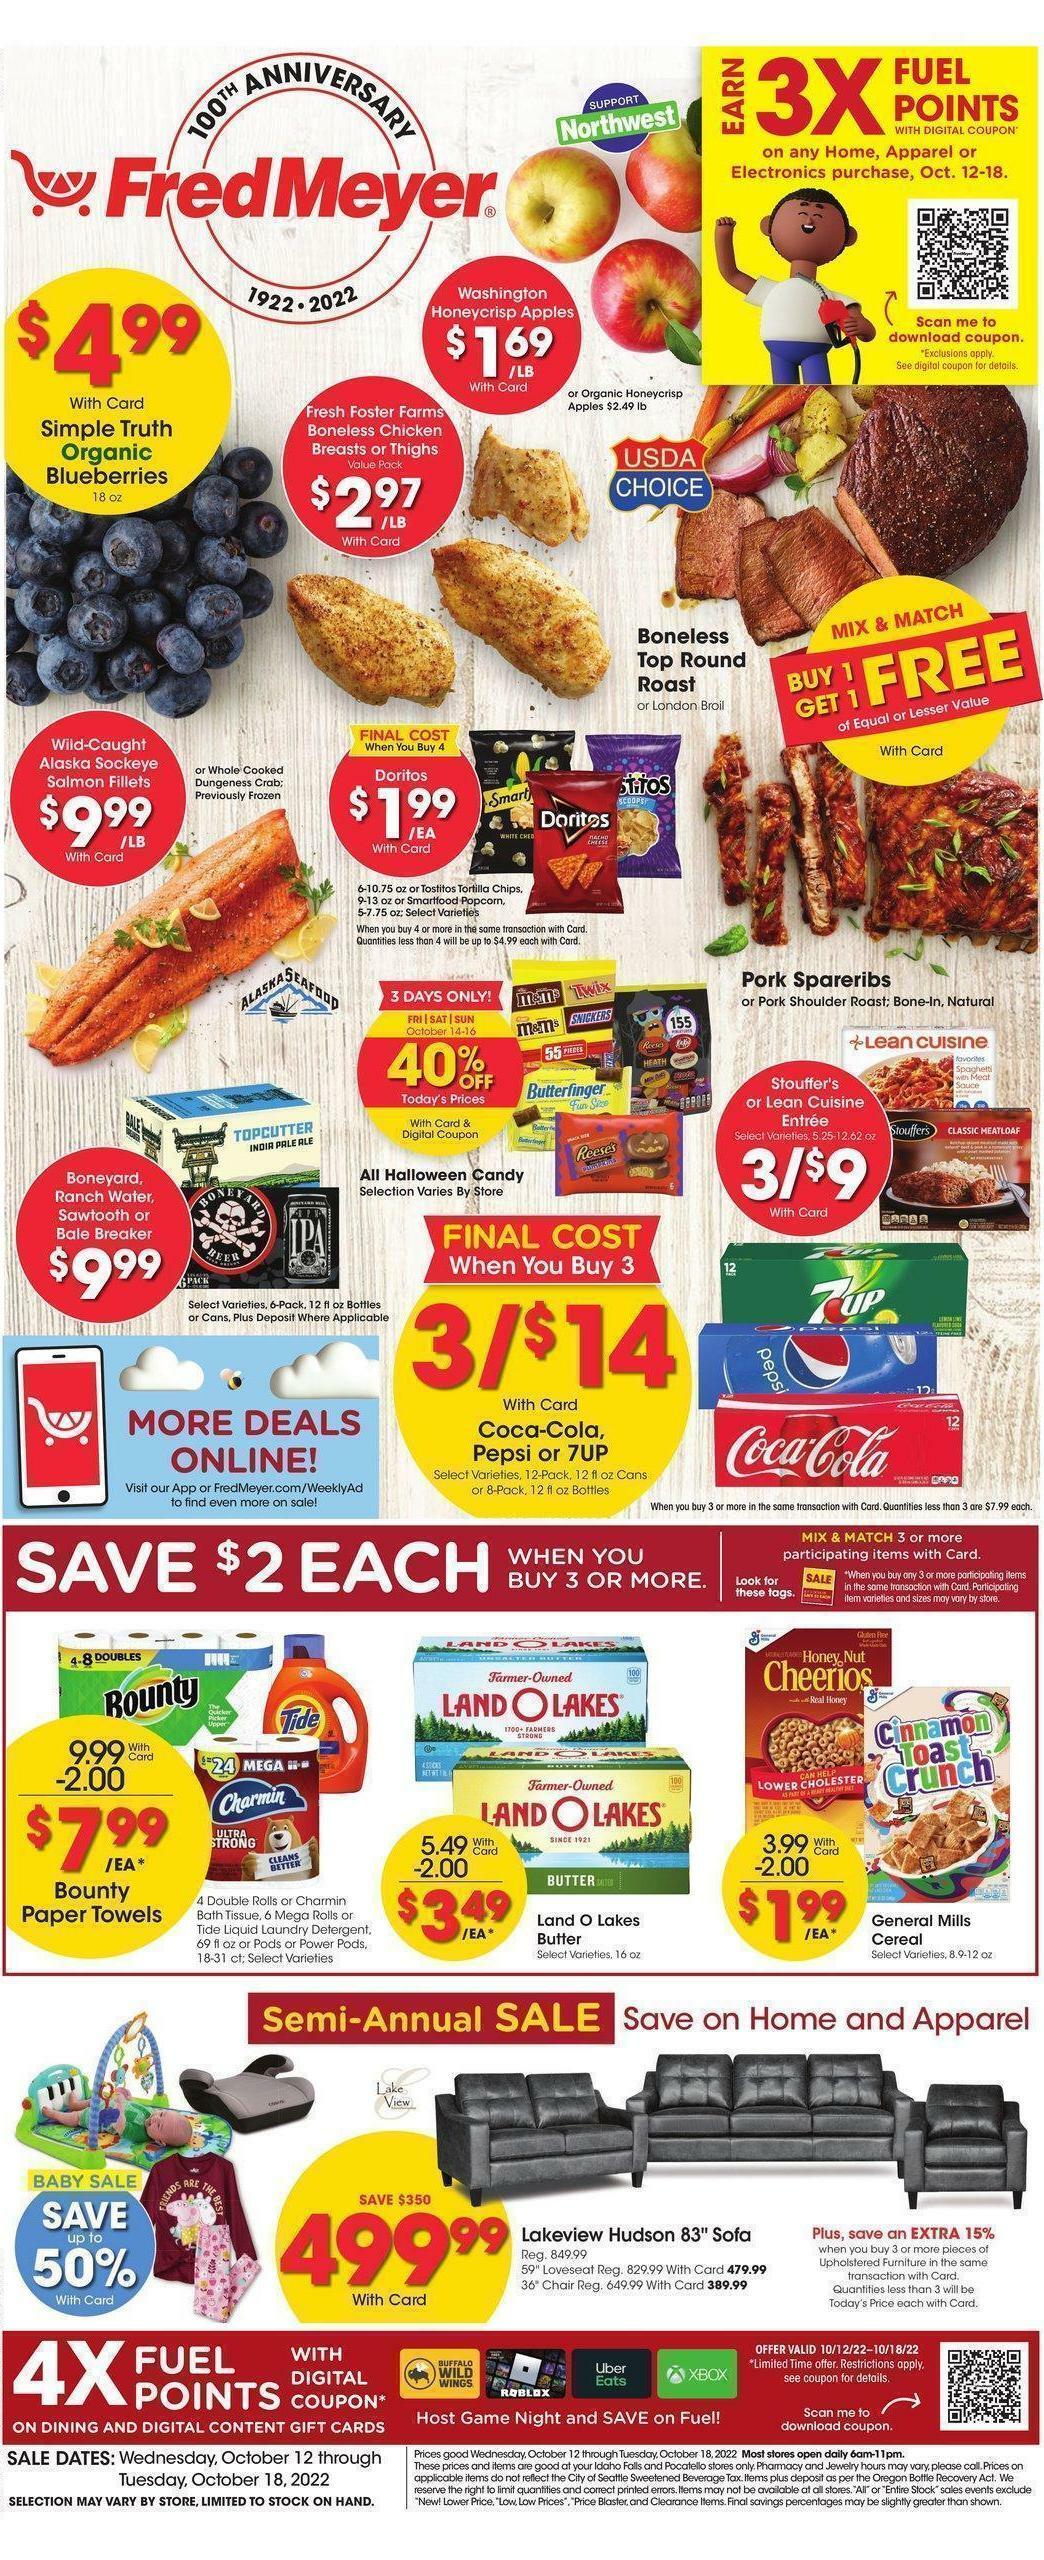 Fred Meyer Weekly Ad from October 12